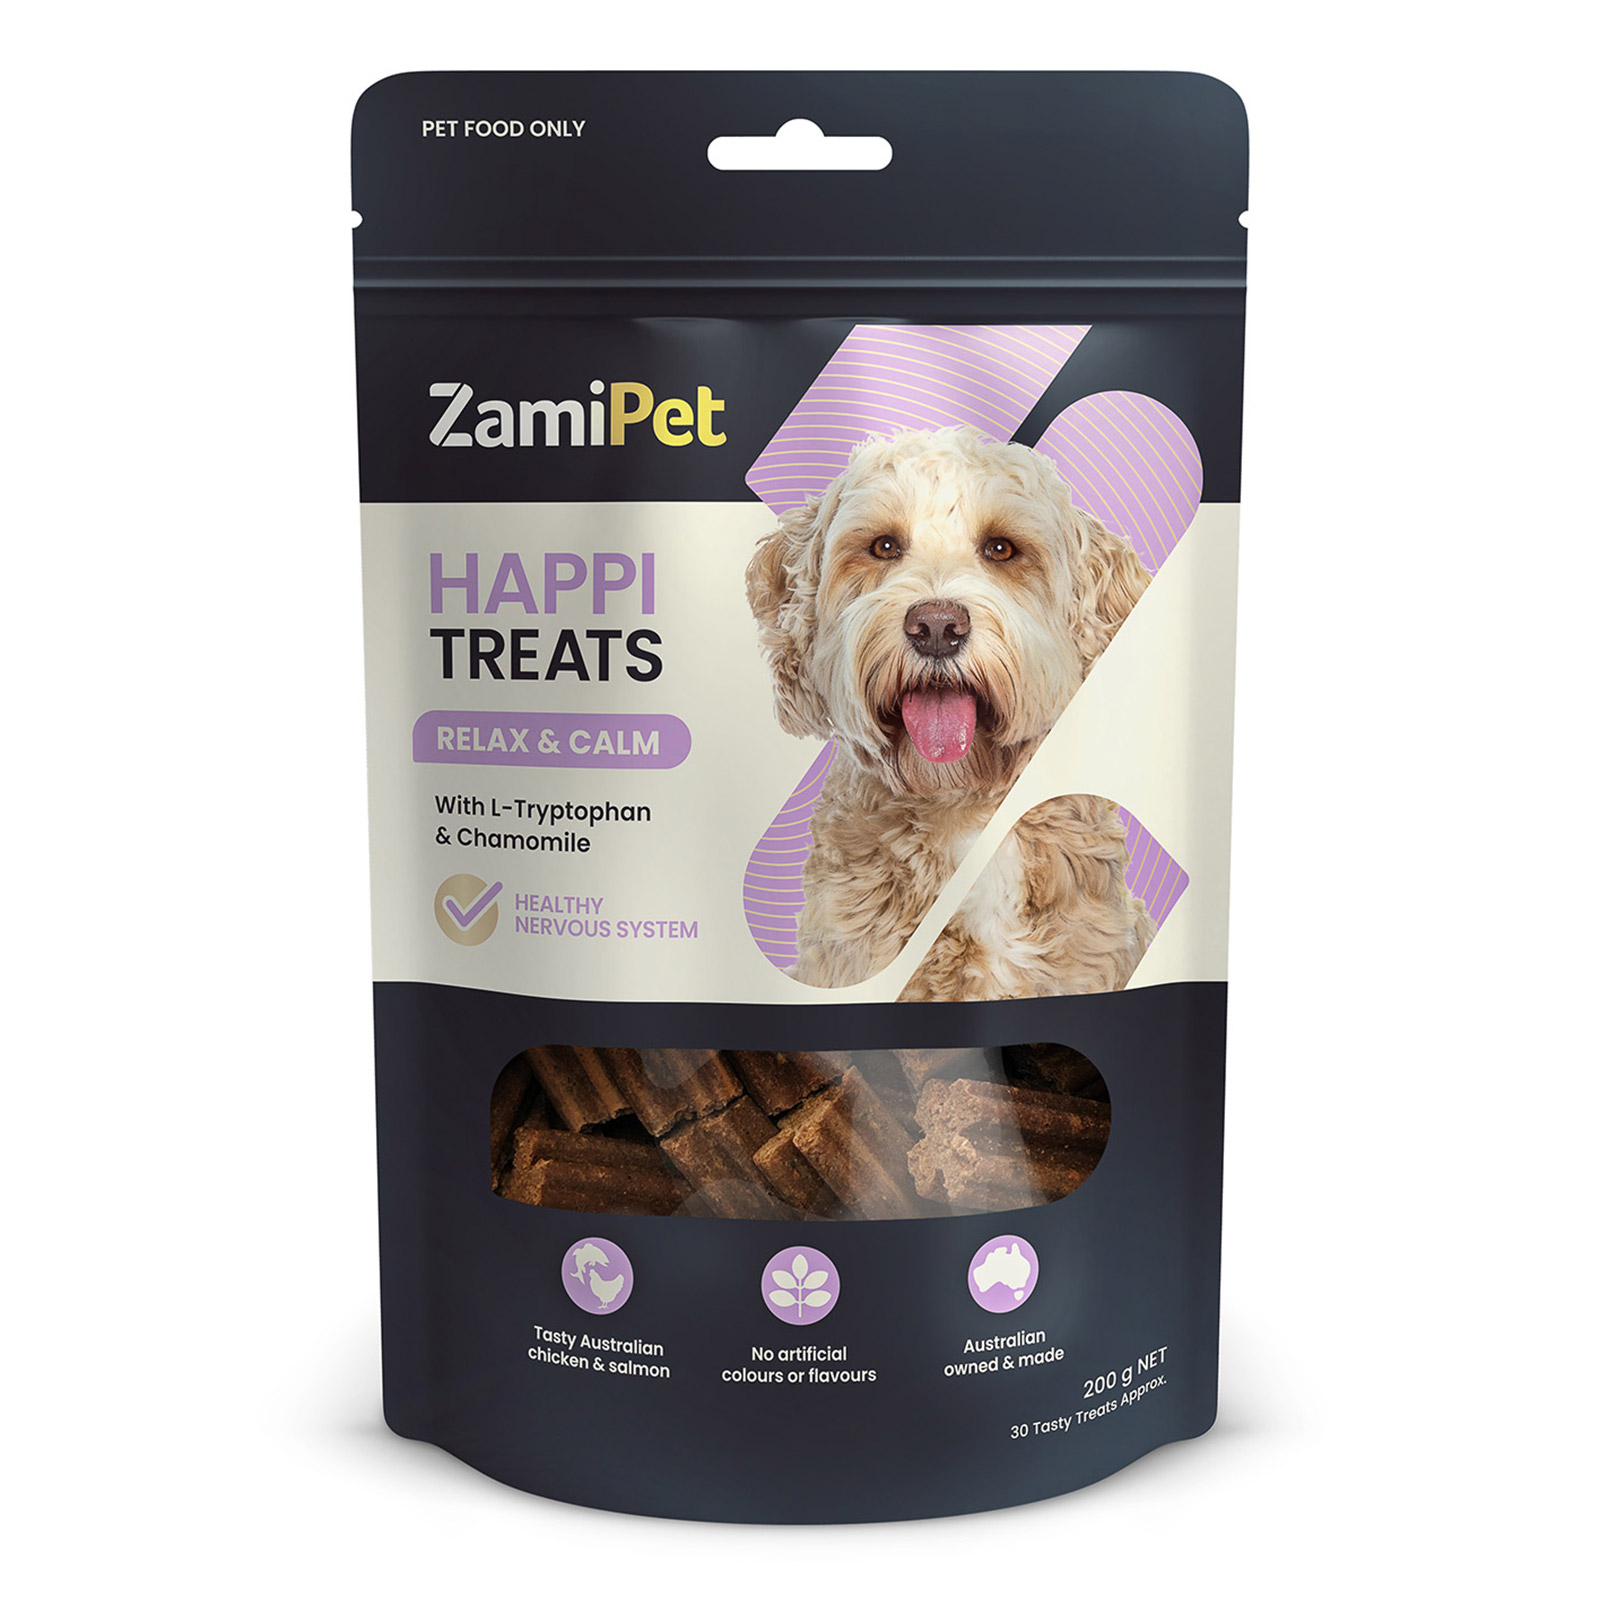 ZamiPet HappiTreats Relax & Calm Dog Chews for Dogs